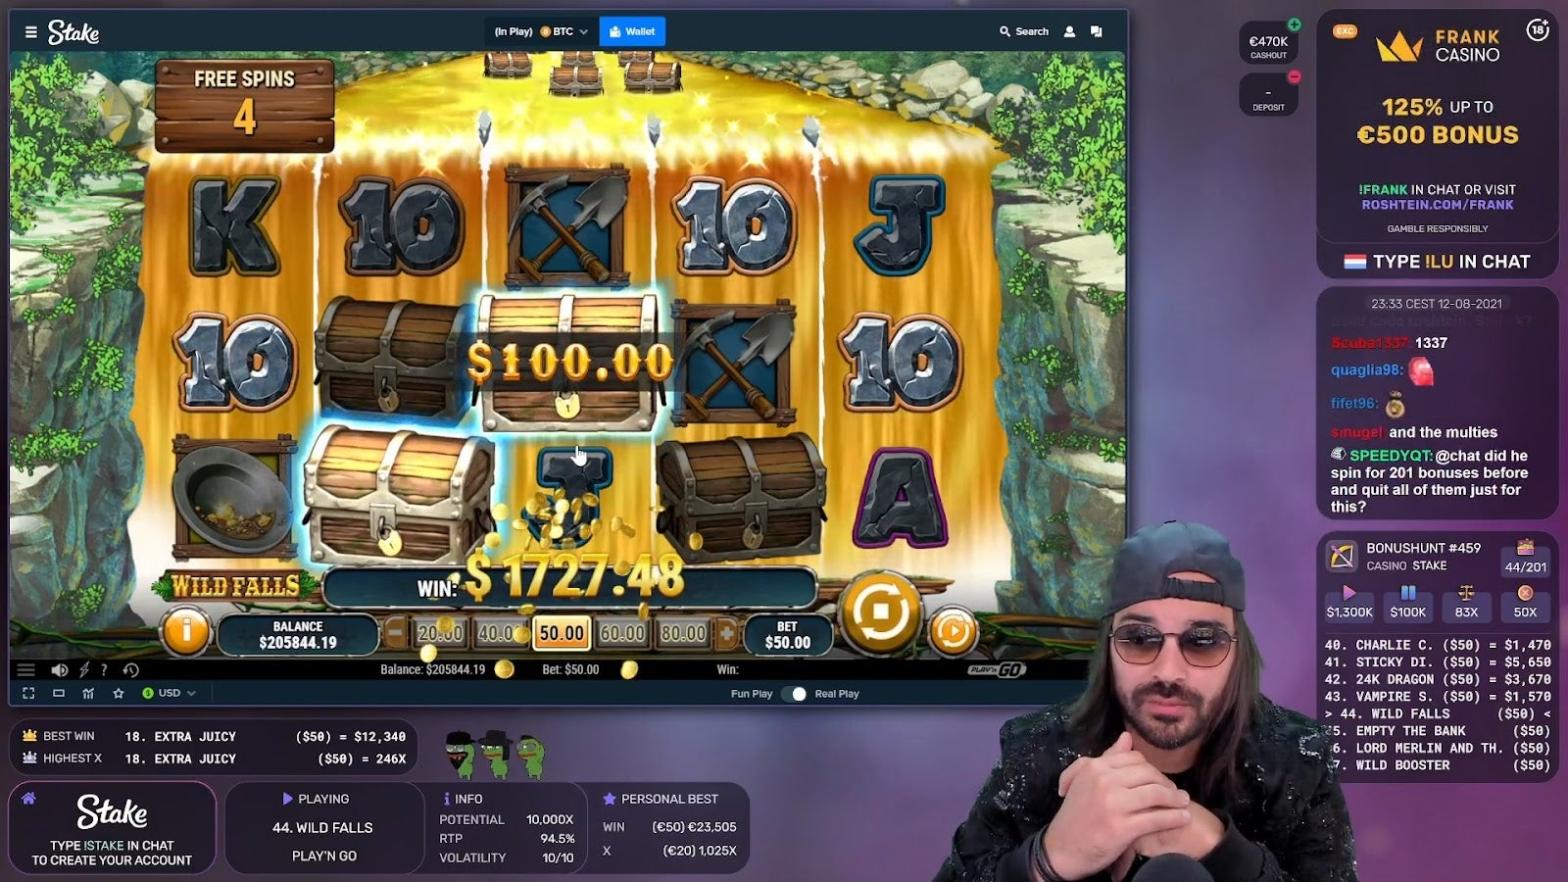 Roshtein is one of the most popular slots streamers on Twitch, (Screenshot: Twitch / Roshtein)